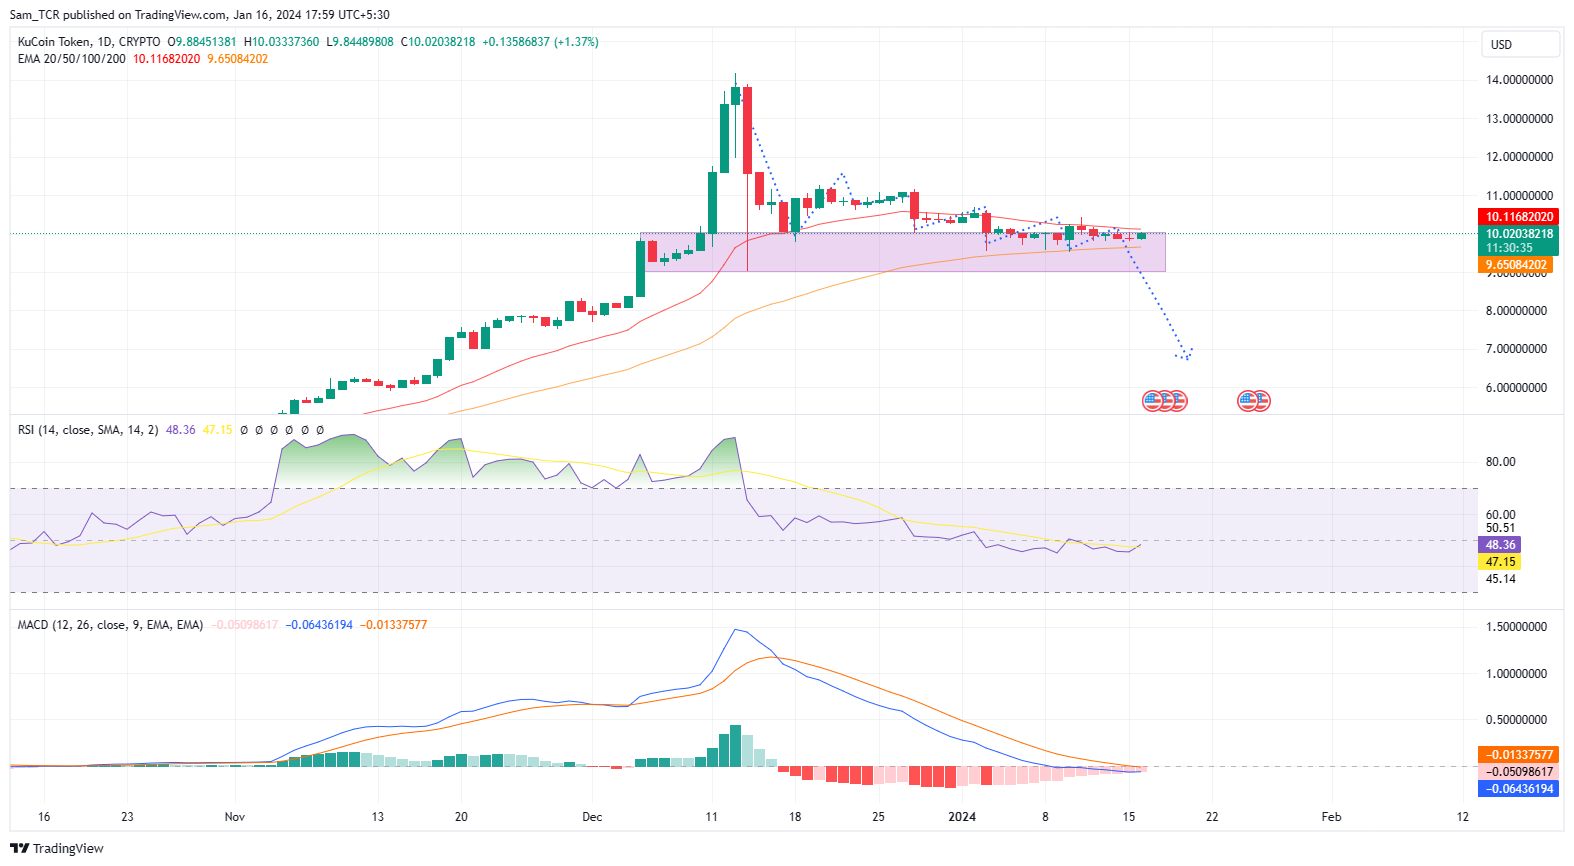 KuCoin Crypto: Can KCS Crypto Hold Its Current Level Or Fall?